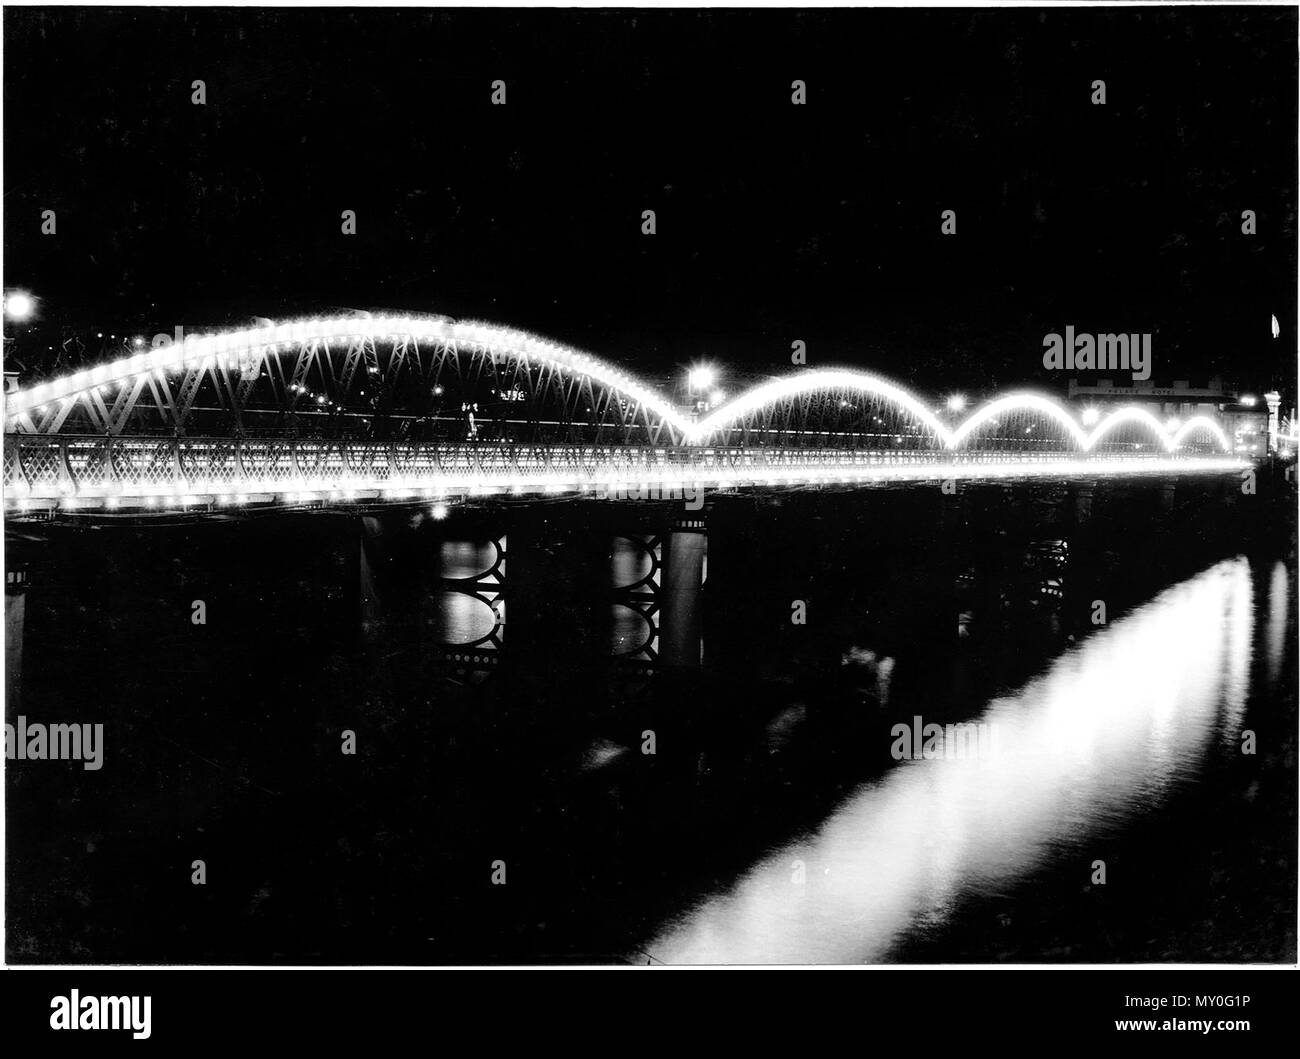 Victoria Bridge illuminations - Royal Visit, Brisbane, March 1954. The Courier-Mail 23 February 1954  BRIDGES LIT UP TO-NIGHT  ROYAL TOUR illuminations on Victoria Bridge and Story Bridge will be switched on to-night.  The Premier (Mr. Gair) said yesterday that this would be the first of a series of such trials.  Others would be: — To-morrow night: South Brisbane Memorial Park, South Brisbane Town Hall, Centenary Place and Albert, Alice and Wickham Streets.  Thursday night: Grey Street Bridge, Coronation Drive and Davies Park. Friday night: The City Hall and other city illuminations, Including Stock Photo